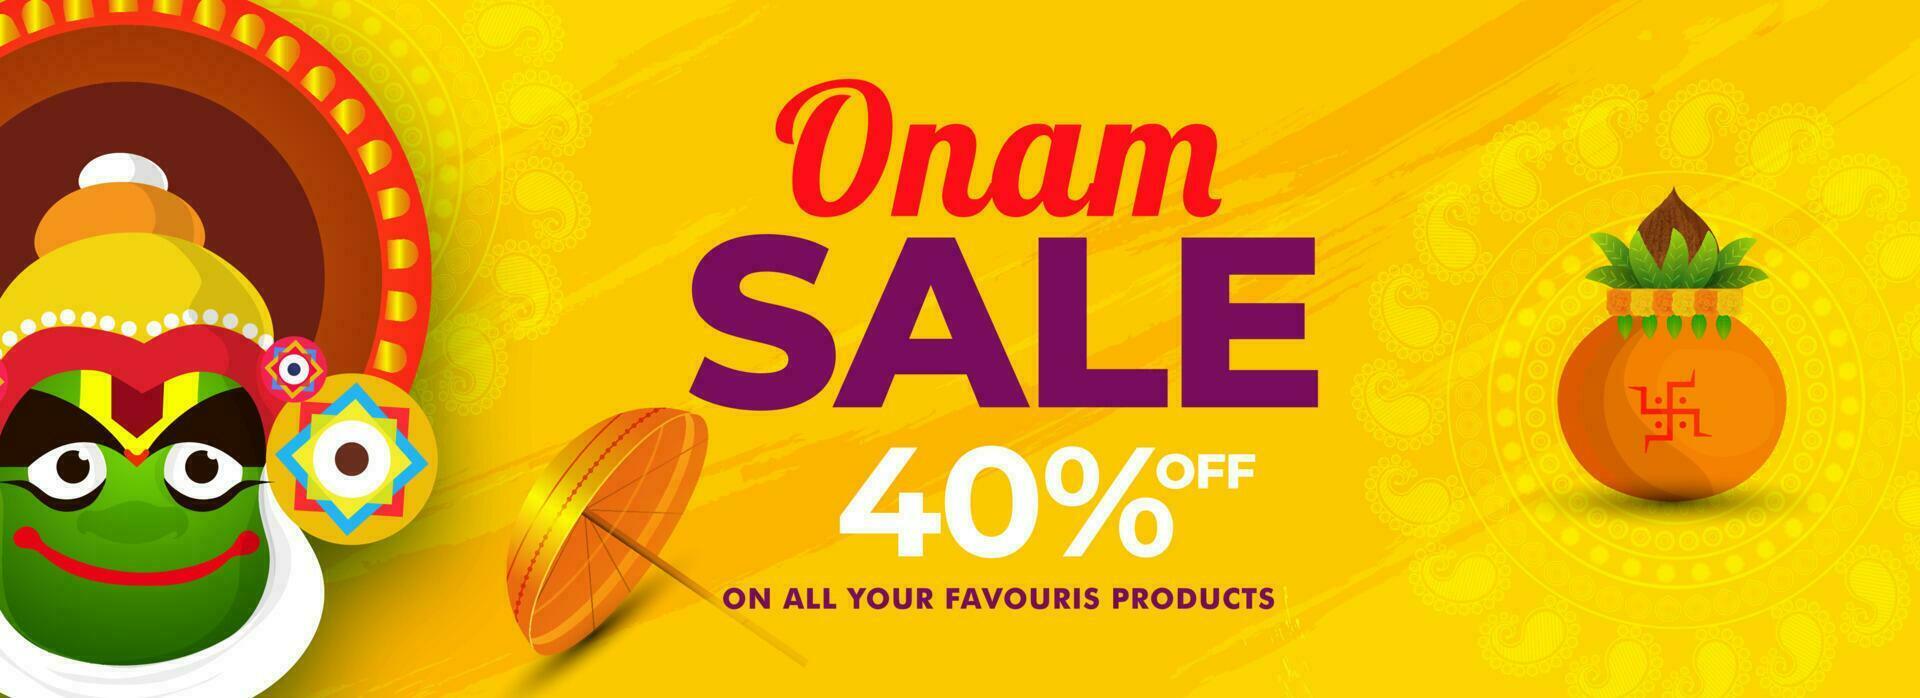 Onam Sale header or banner design with 40 discount offer, Kathakali Dancer face, Worship Pot and golden umbrella on yellow abstract background. vector